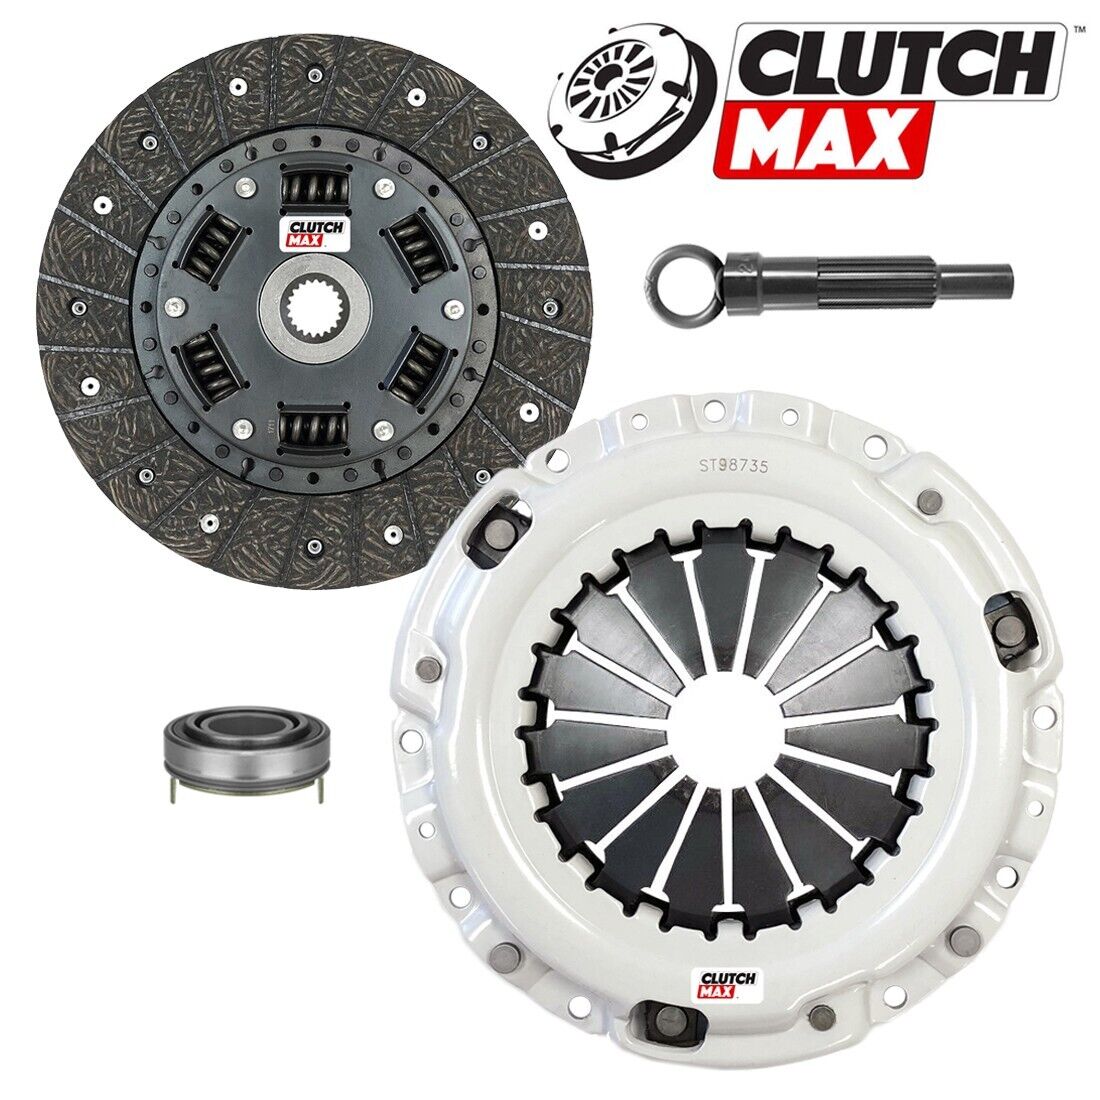 STAGE 2 PERFORMANCE CLUTCH KIT for 1996-2005 MITSUBISHI ECLIPSE 2.4L 4cyl SPYDER